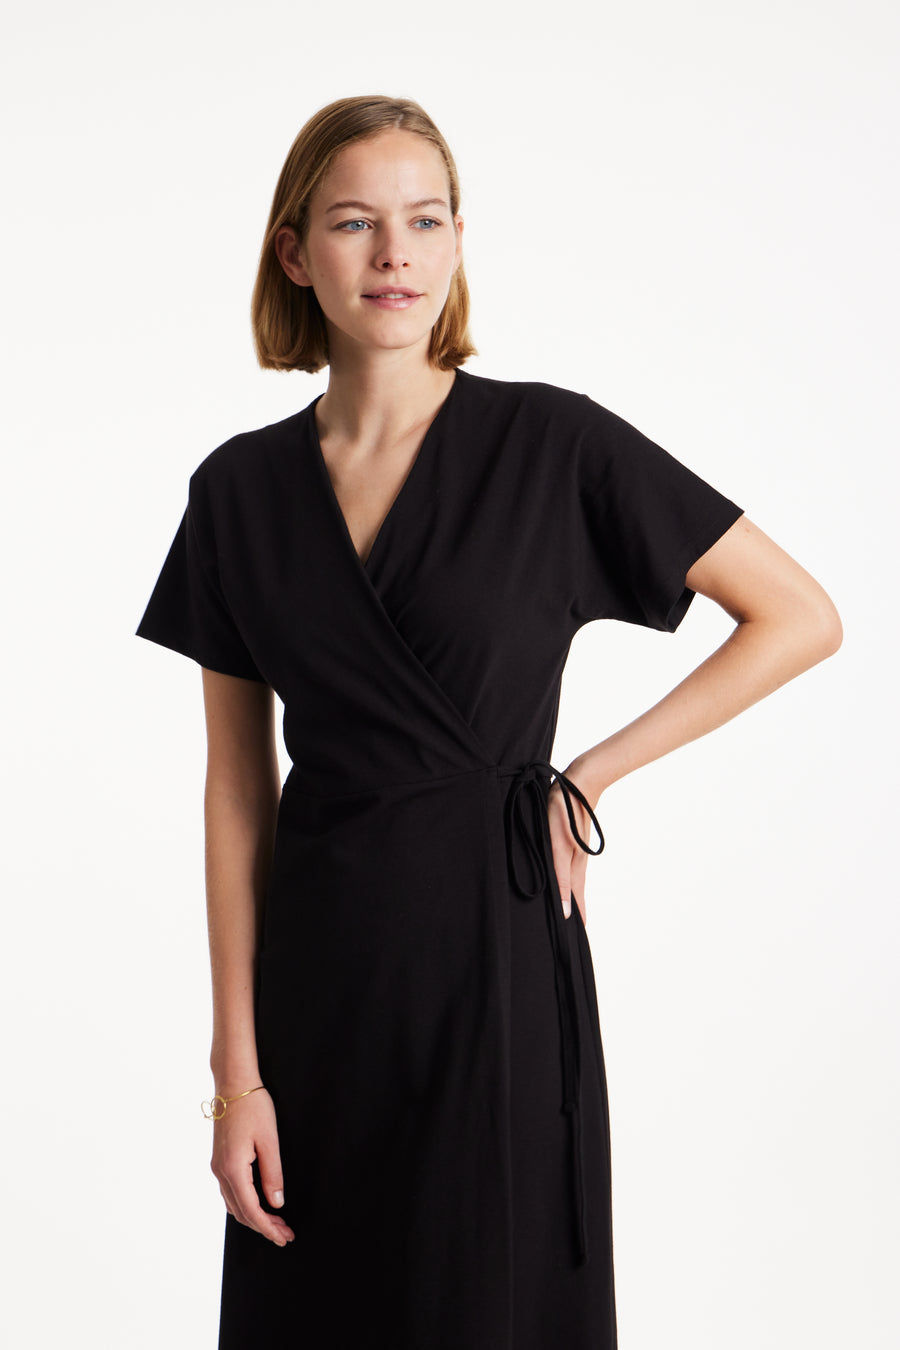 People Tree Fair Trade, Ethical & Sustainable Leora Wrap Dress in Black 95% organic certified cotton, 5% elastane